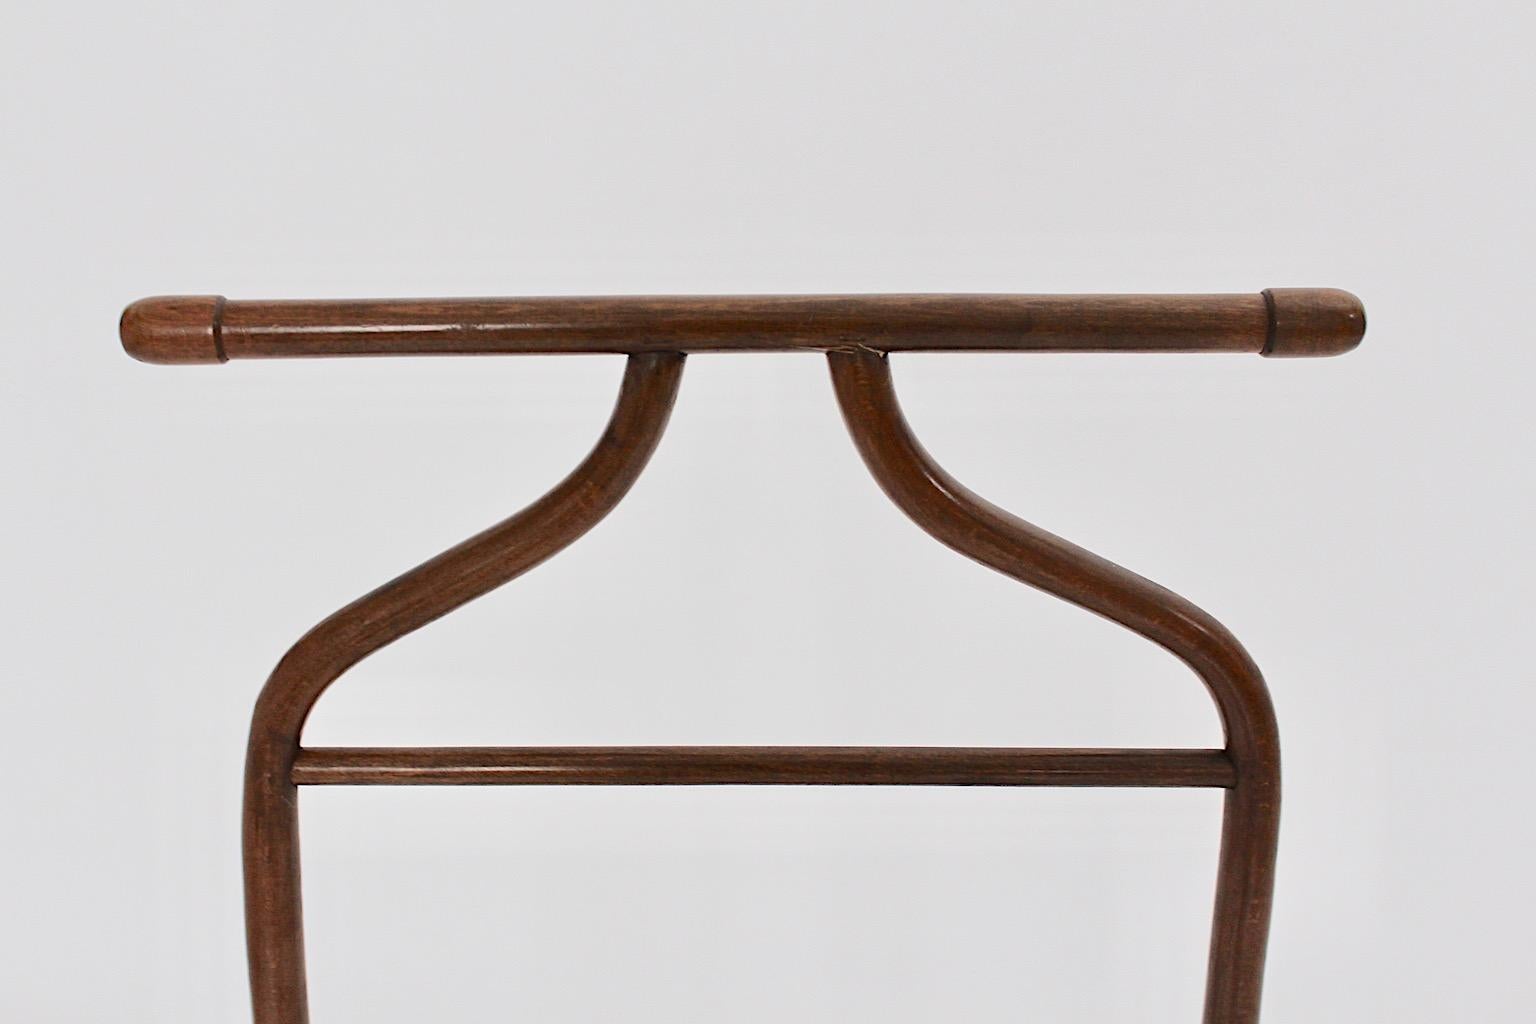 Early 20th Century Art Deco Vintage Bentwood Beech Valet Coat Rack by Thonet, Vienna, 1920s For Sale